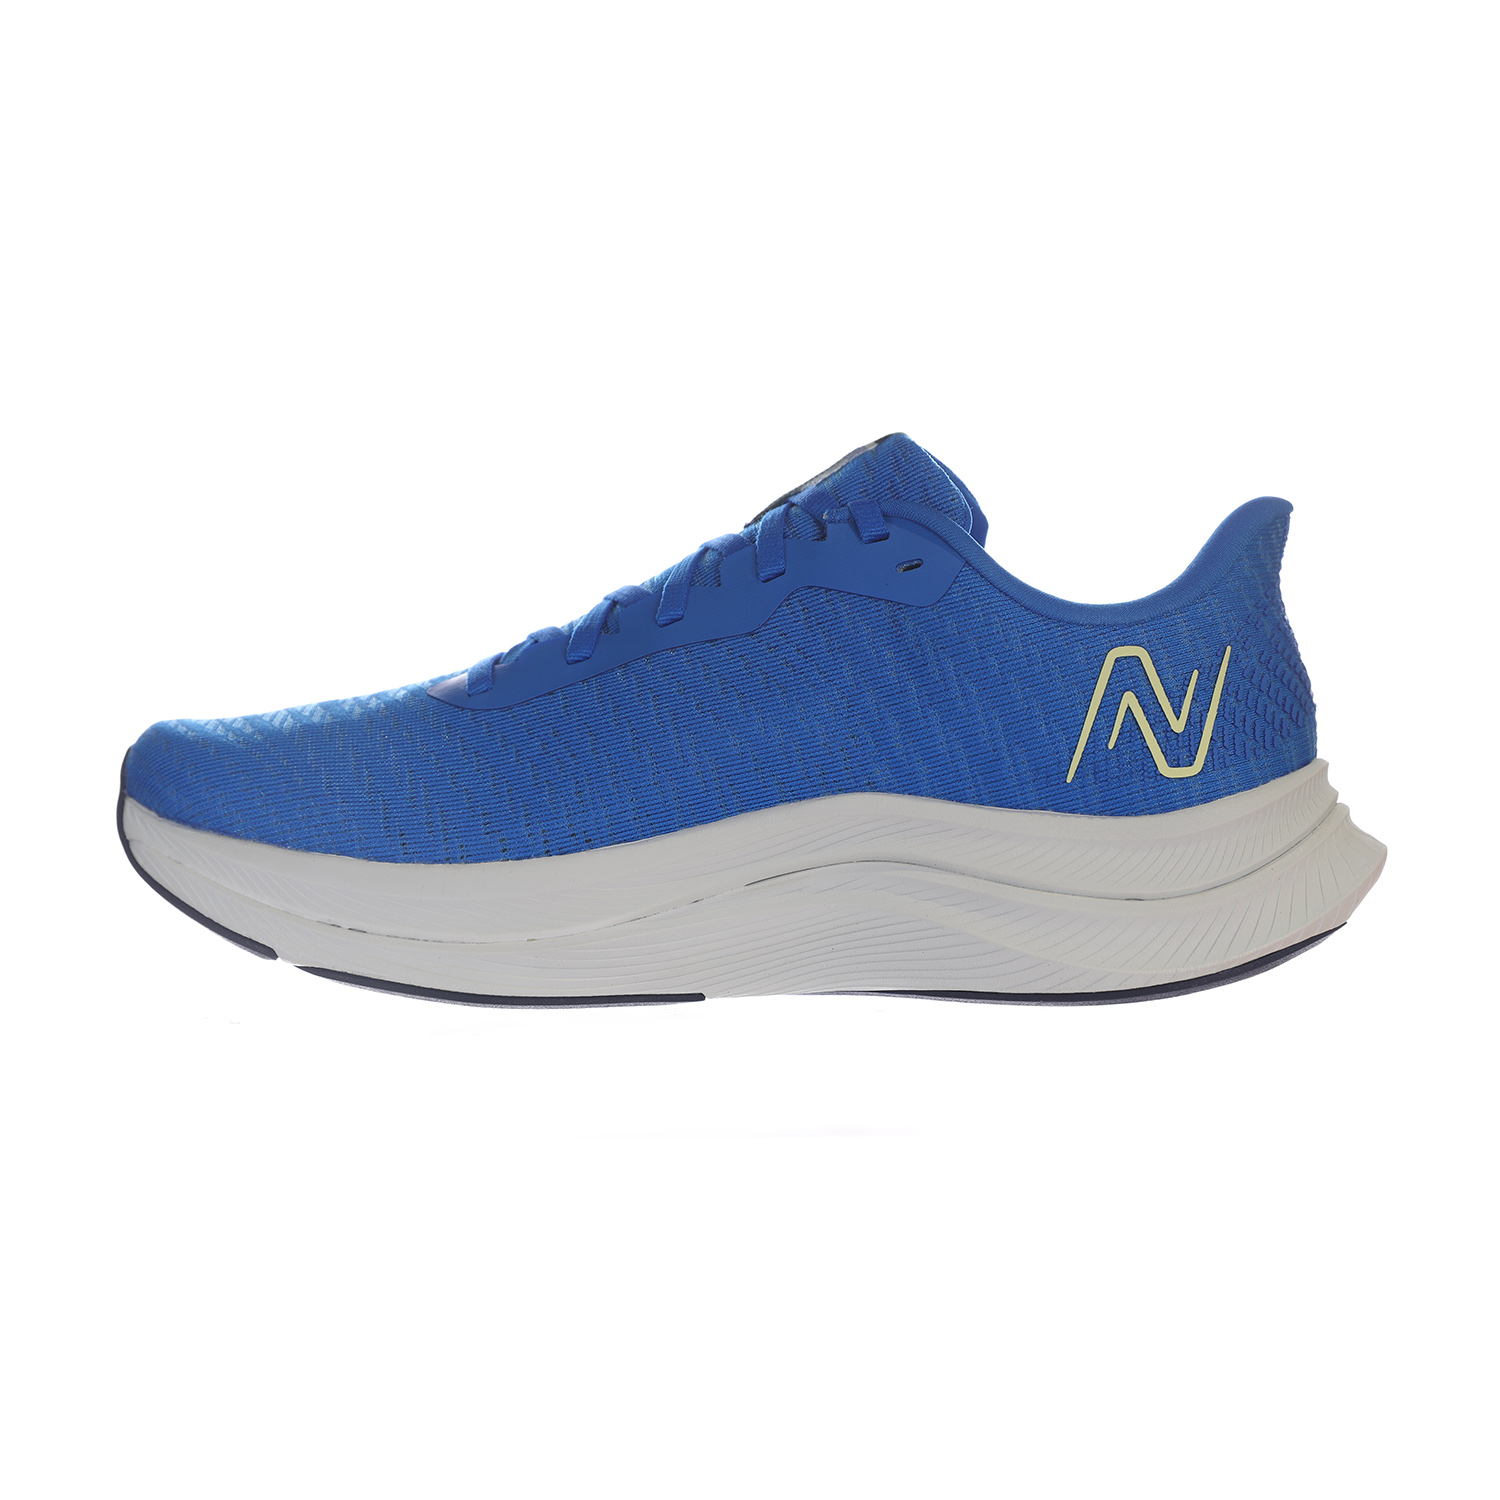 New Balance Fuelcell Propel v4 - Blue Oasis